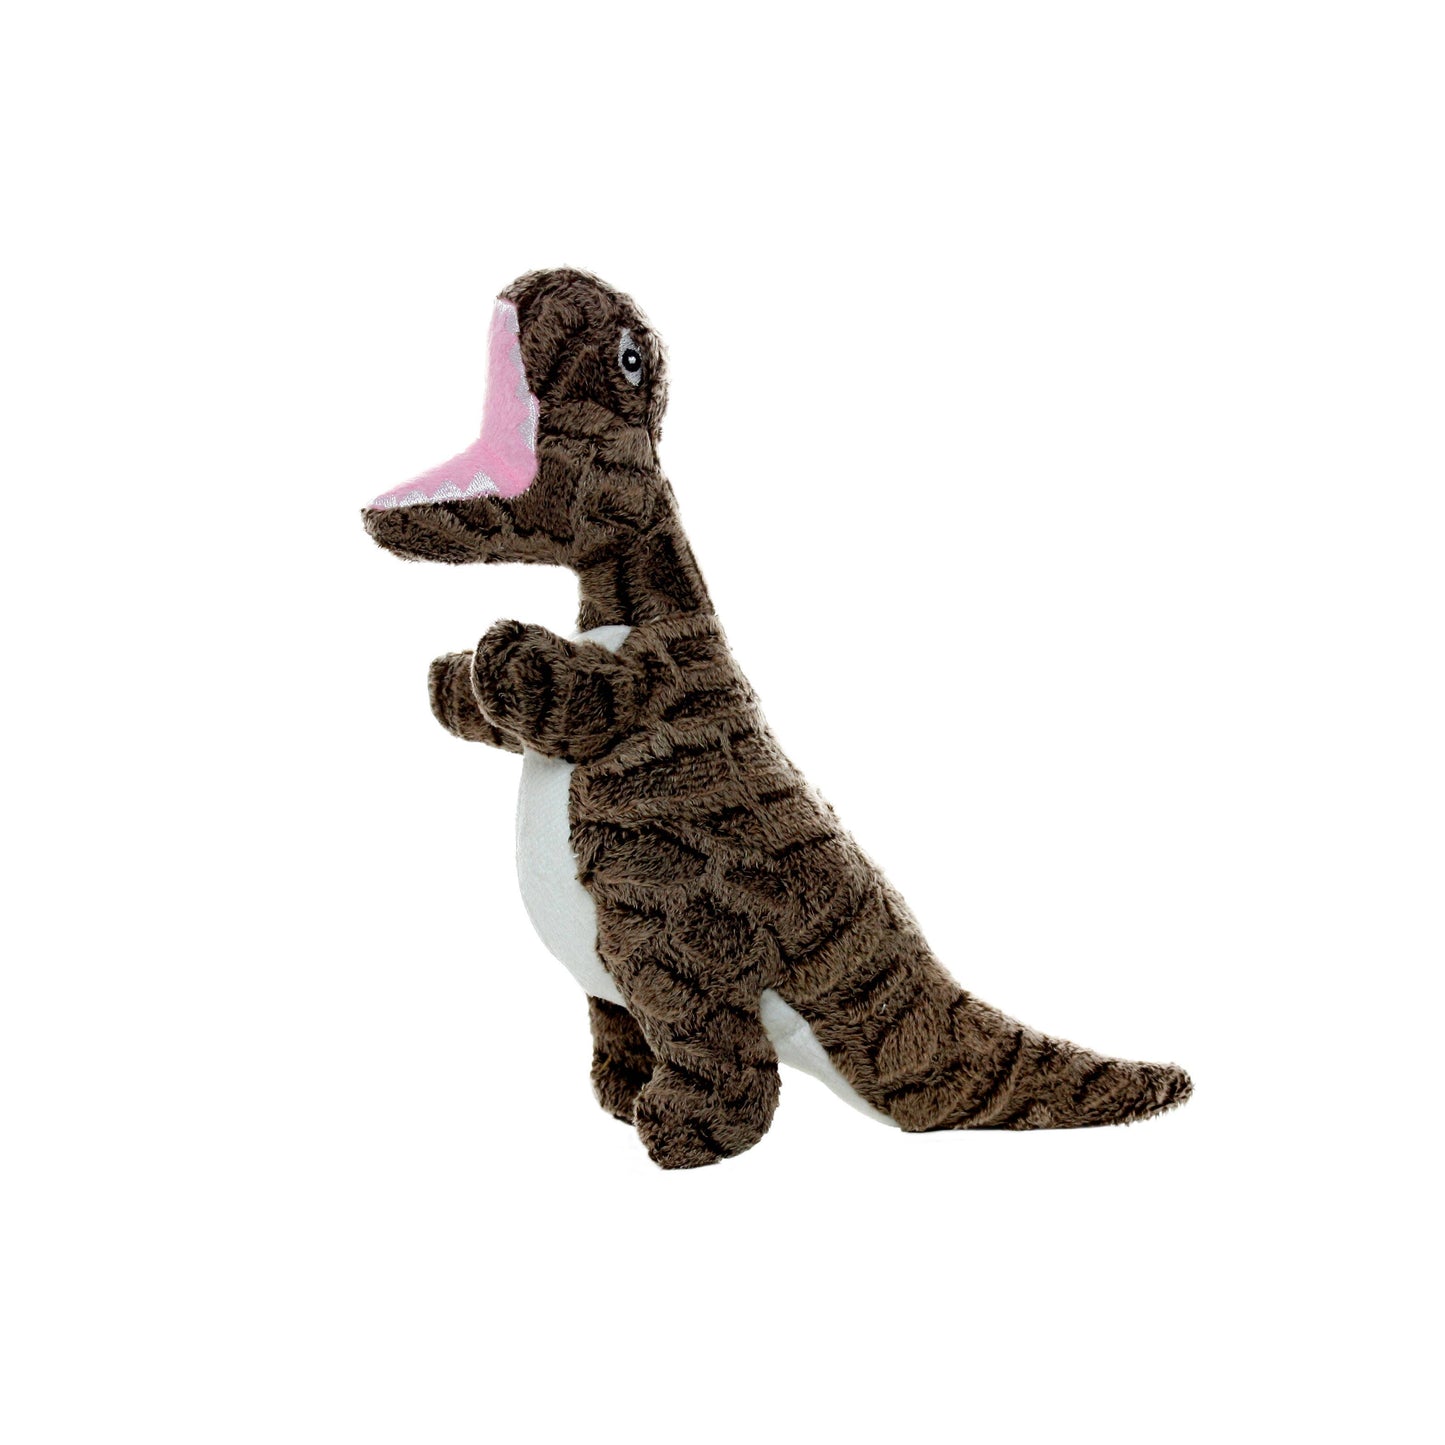 Mighty Jr TRex, Plush, Squeaky Dog Toy